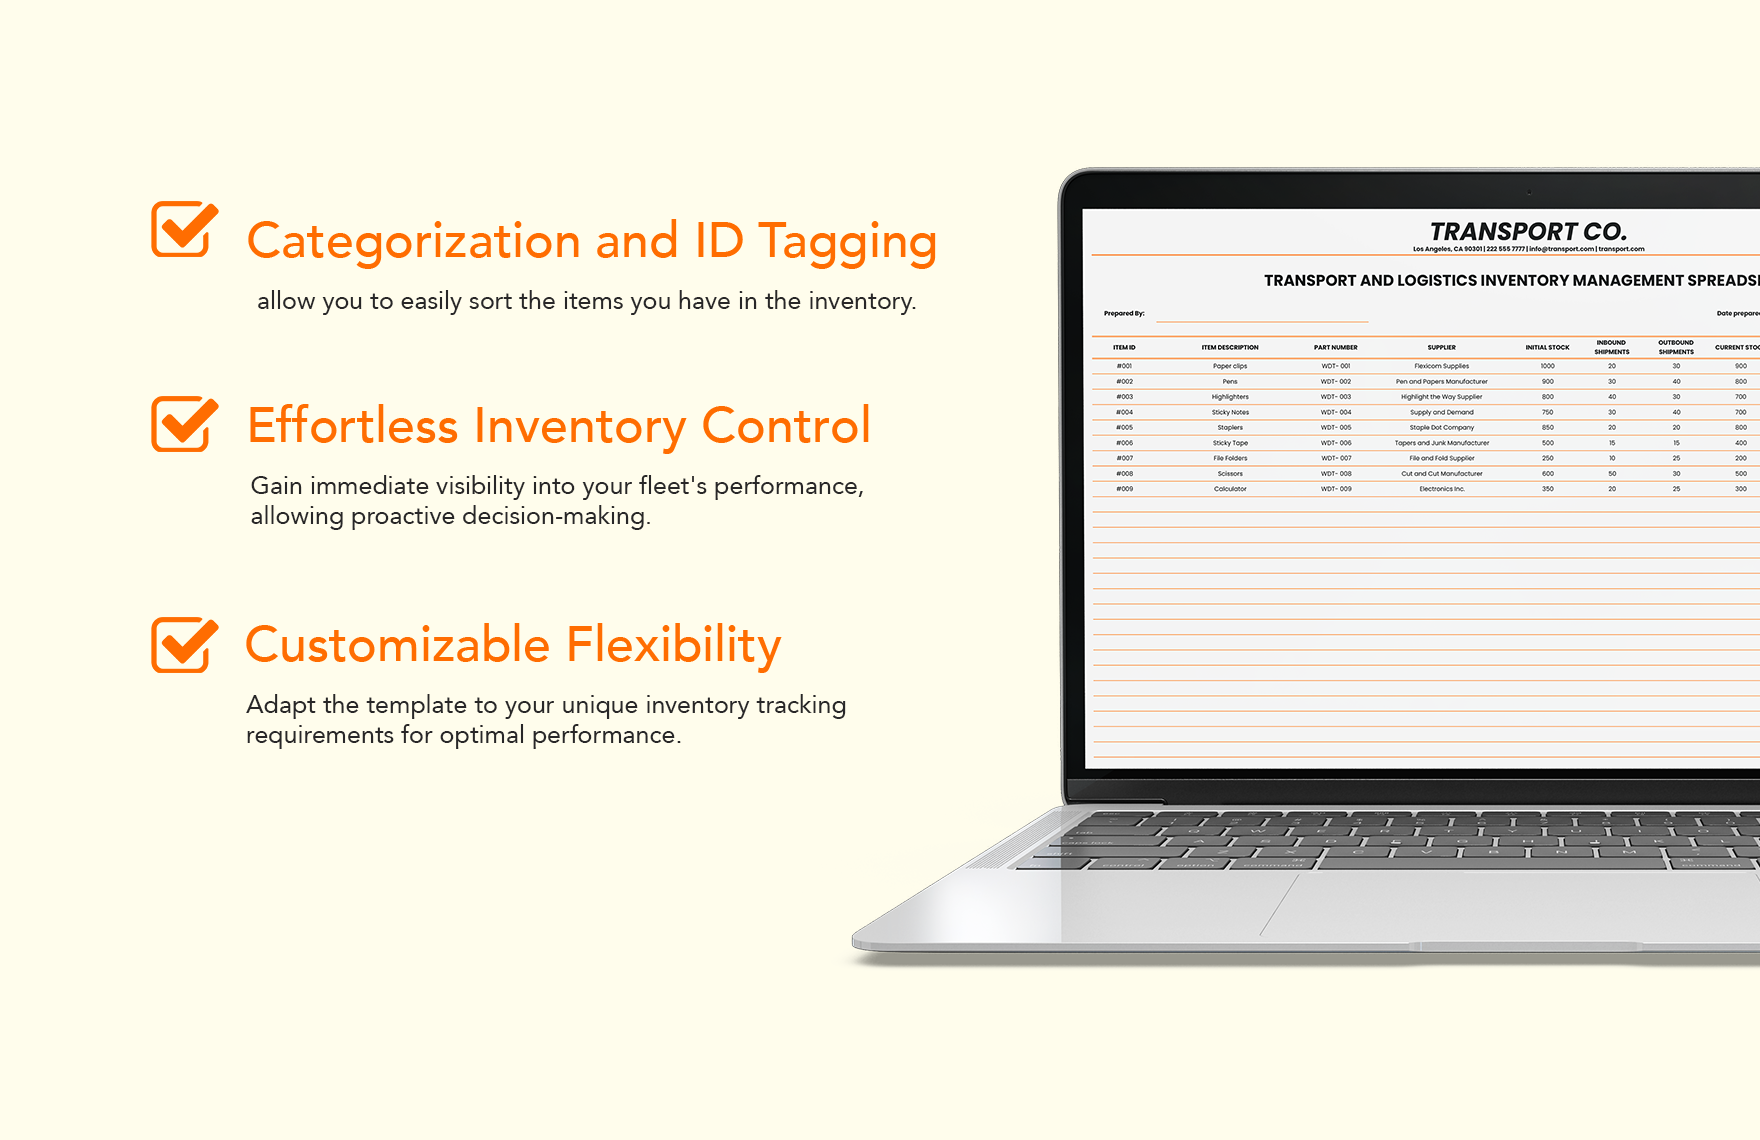 Transport and Logistics Inventory Management Spreadsheet Template